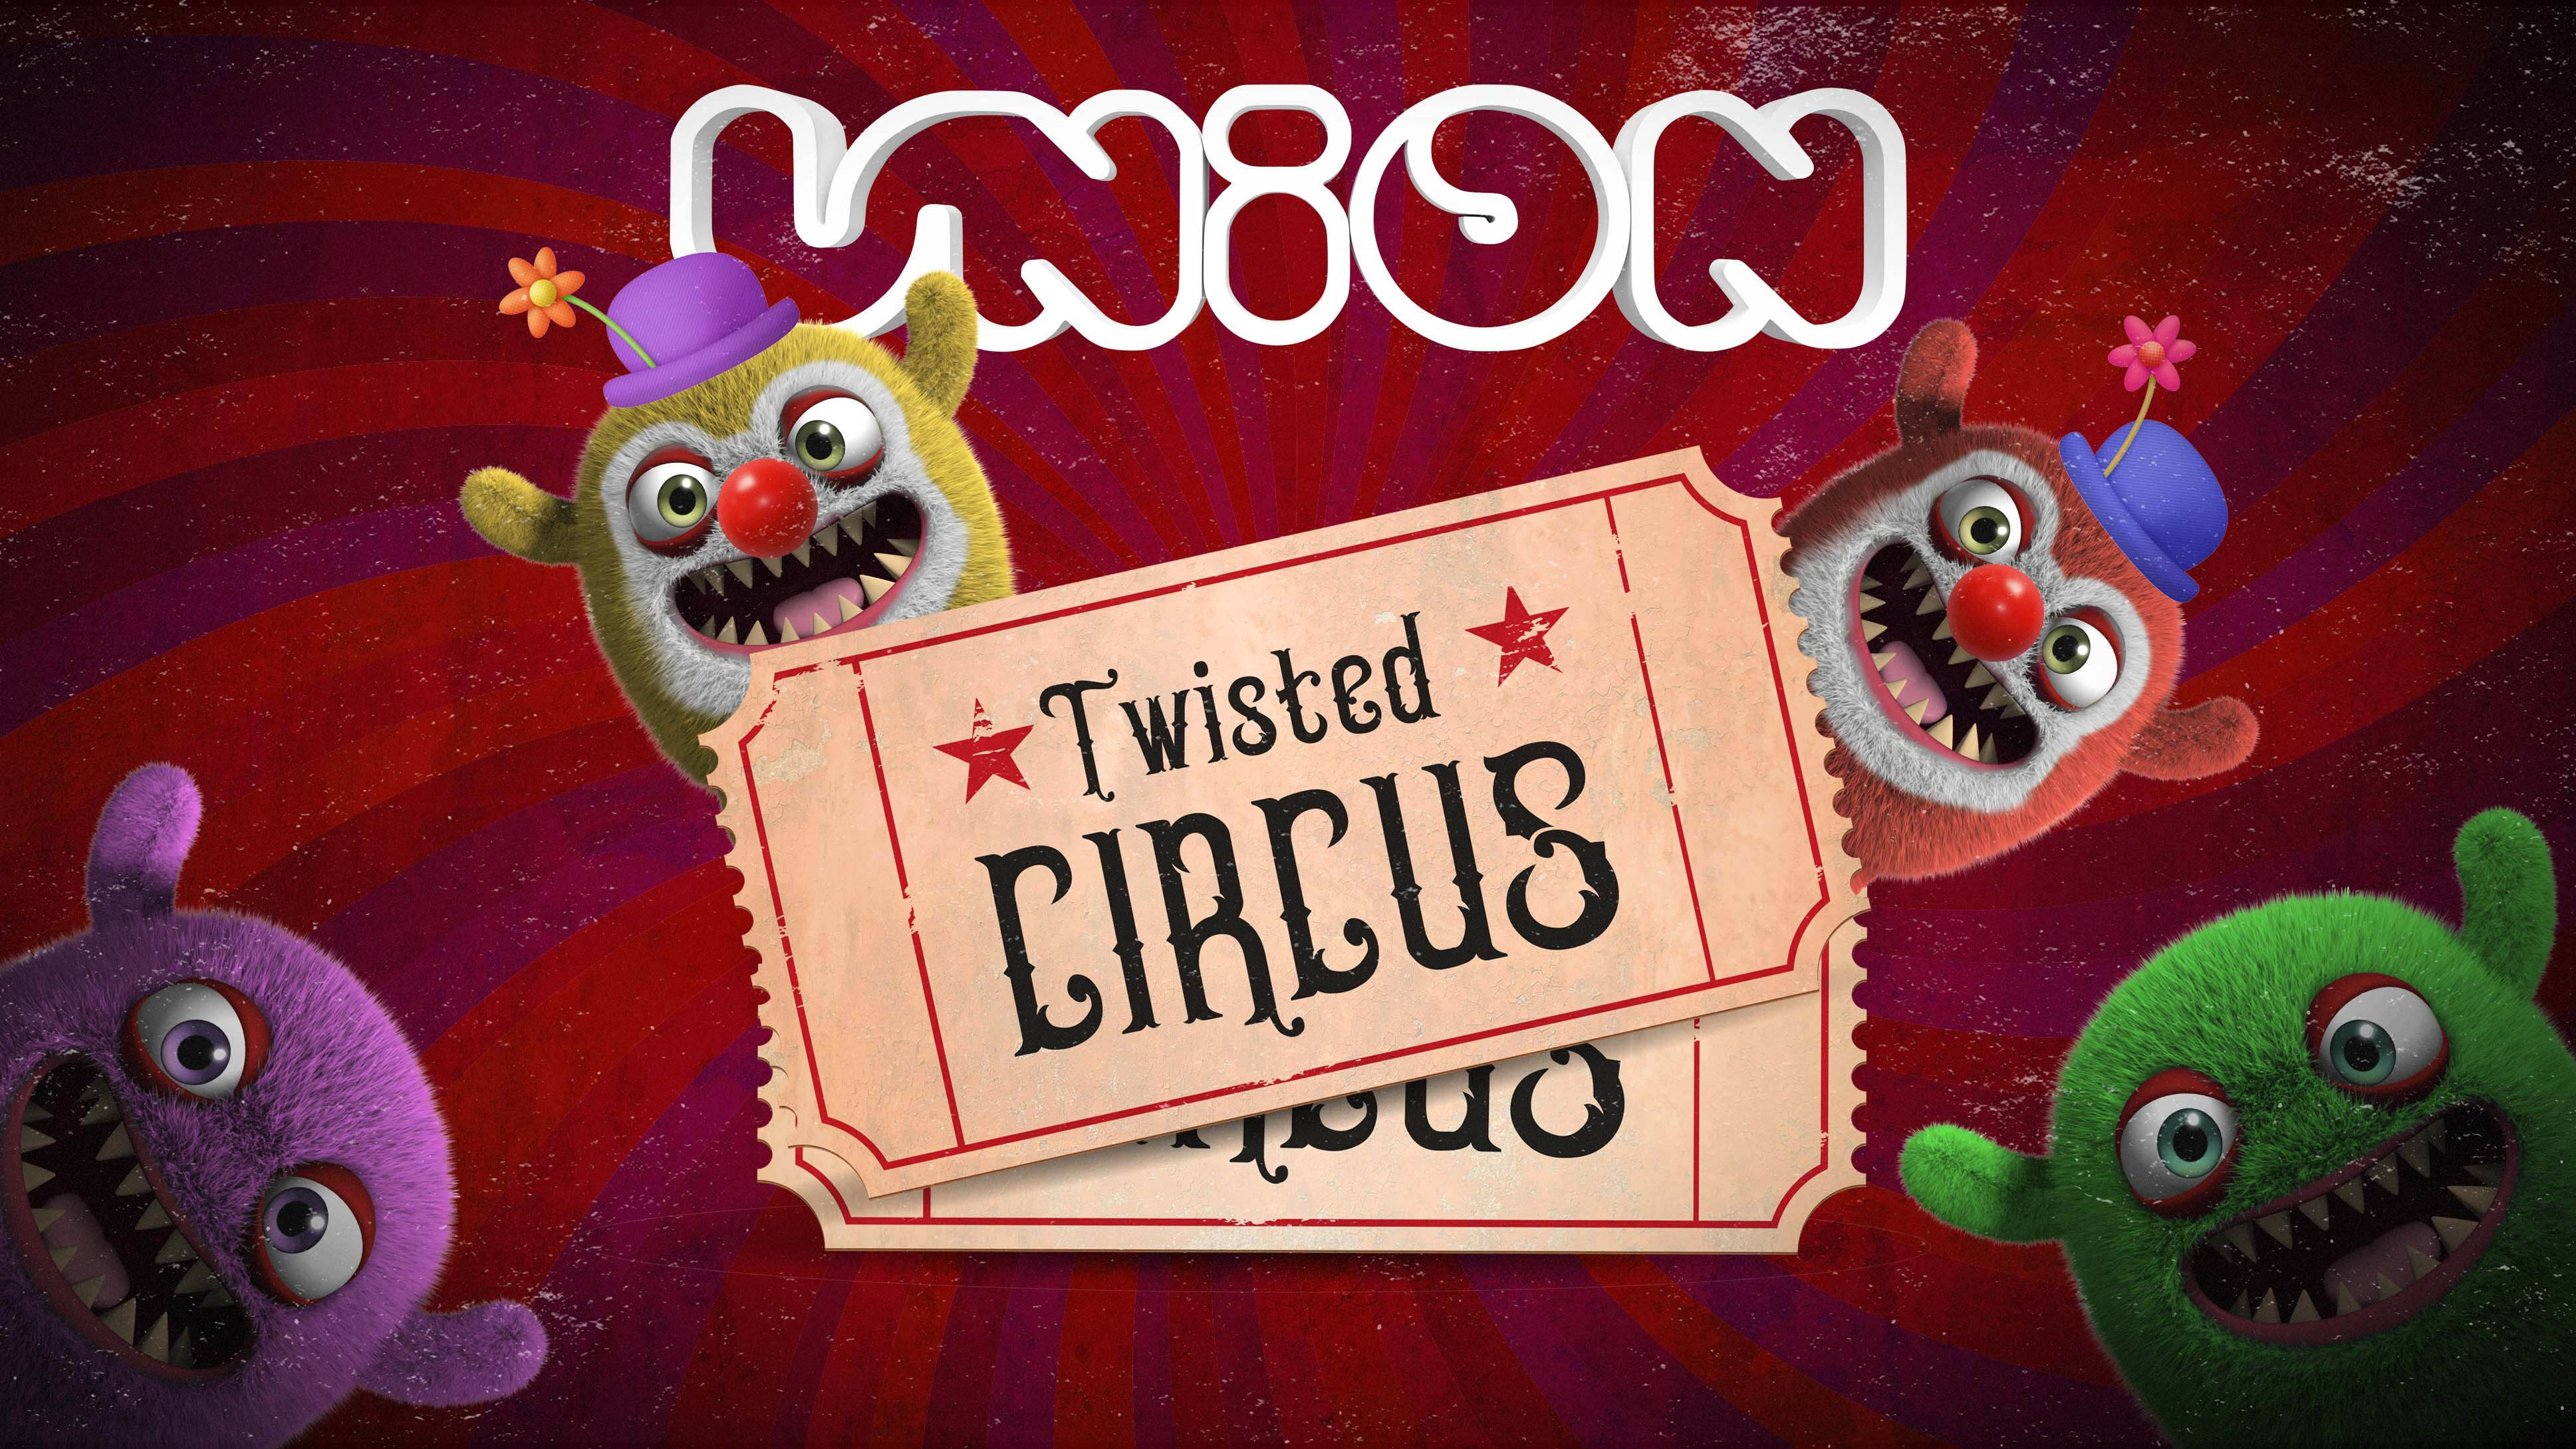 UNION TUESDAY’S PRESENTS THE TWISTED CIRCUS 🤡